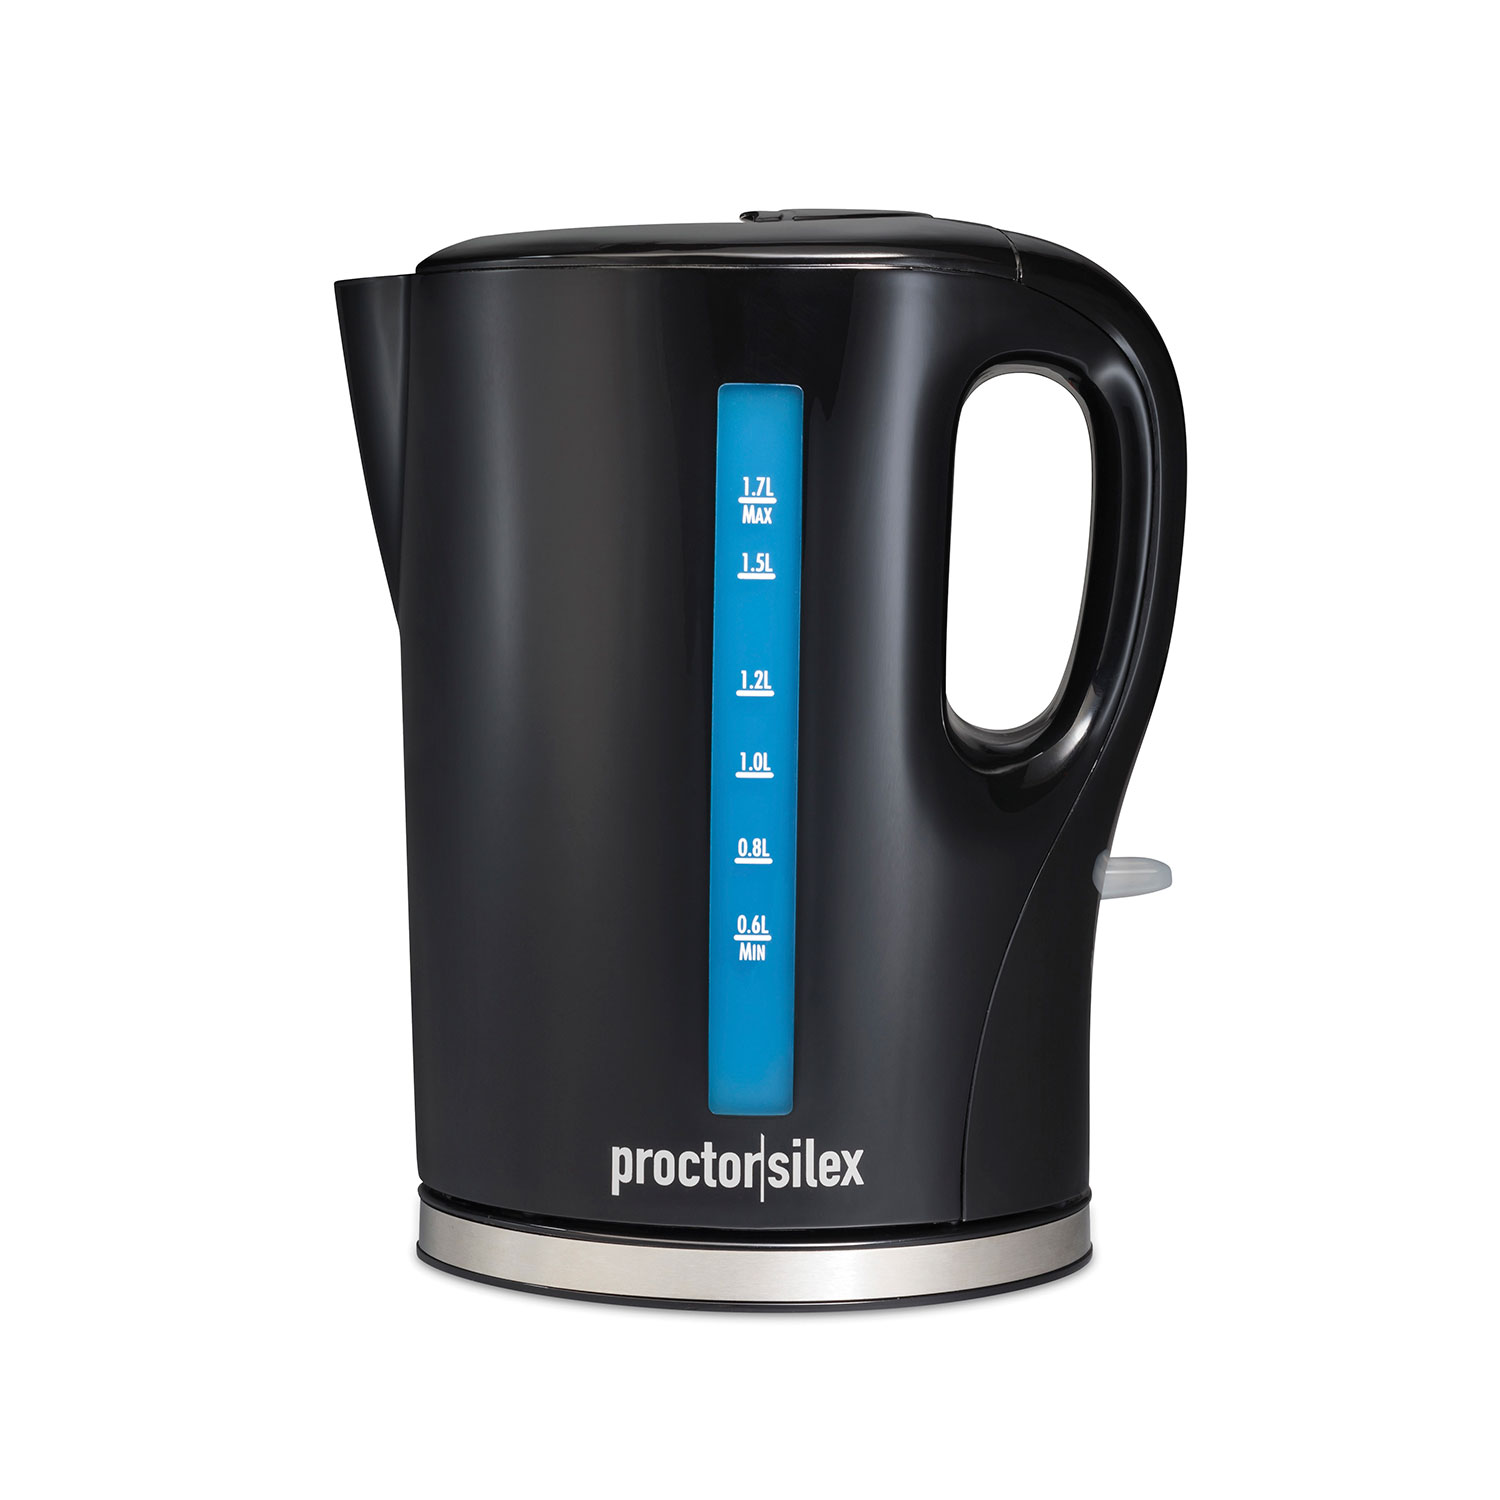 1.7 Liter Cordless Electric Kettle with Auto Shutoff - 41002F Small Size